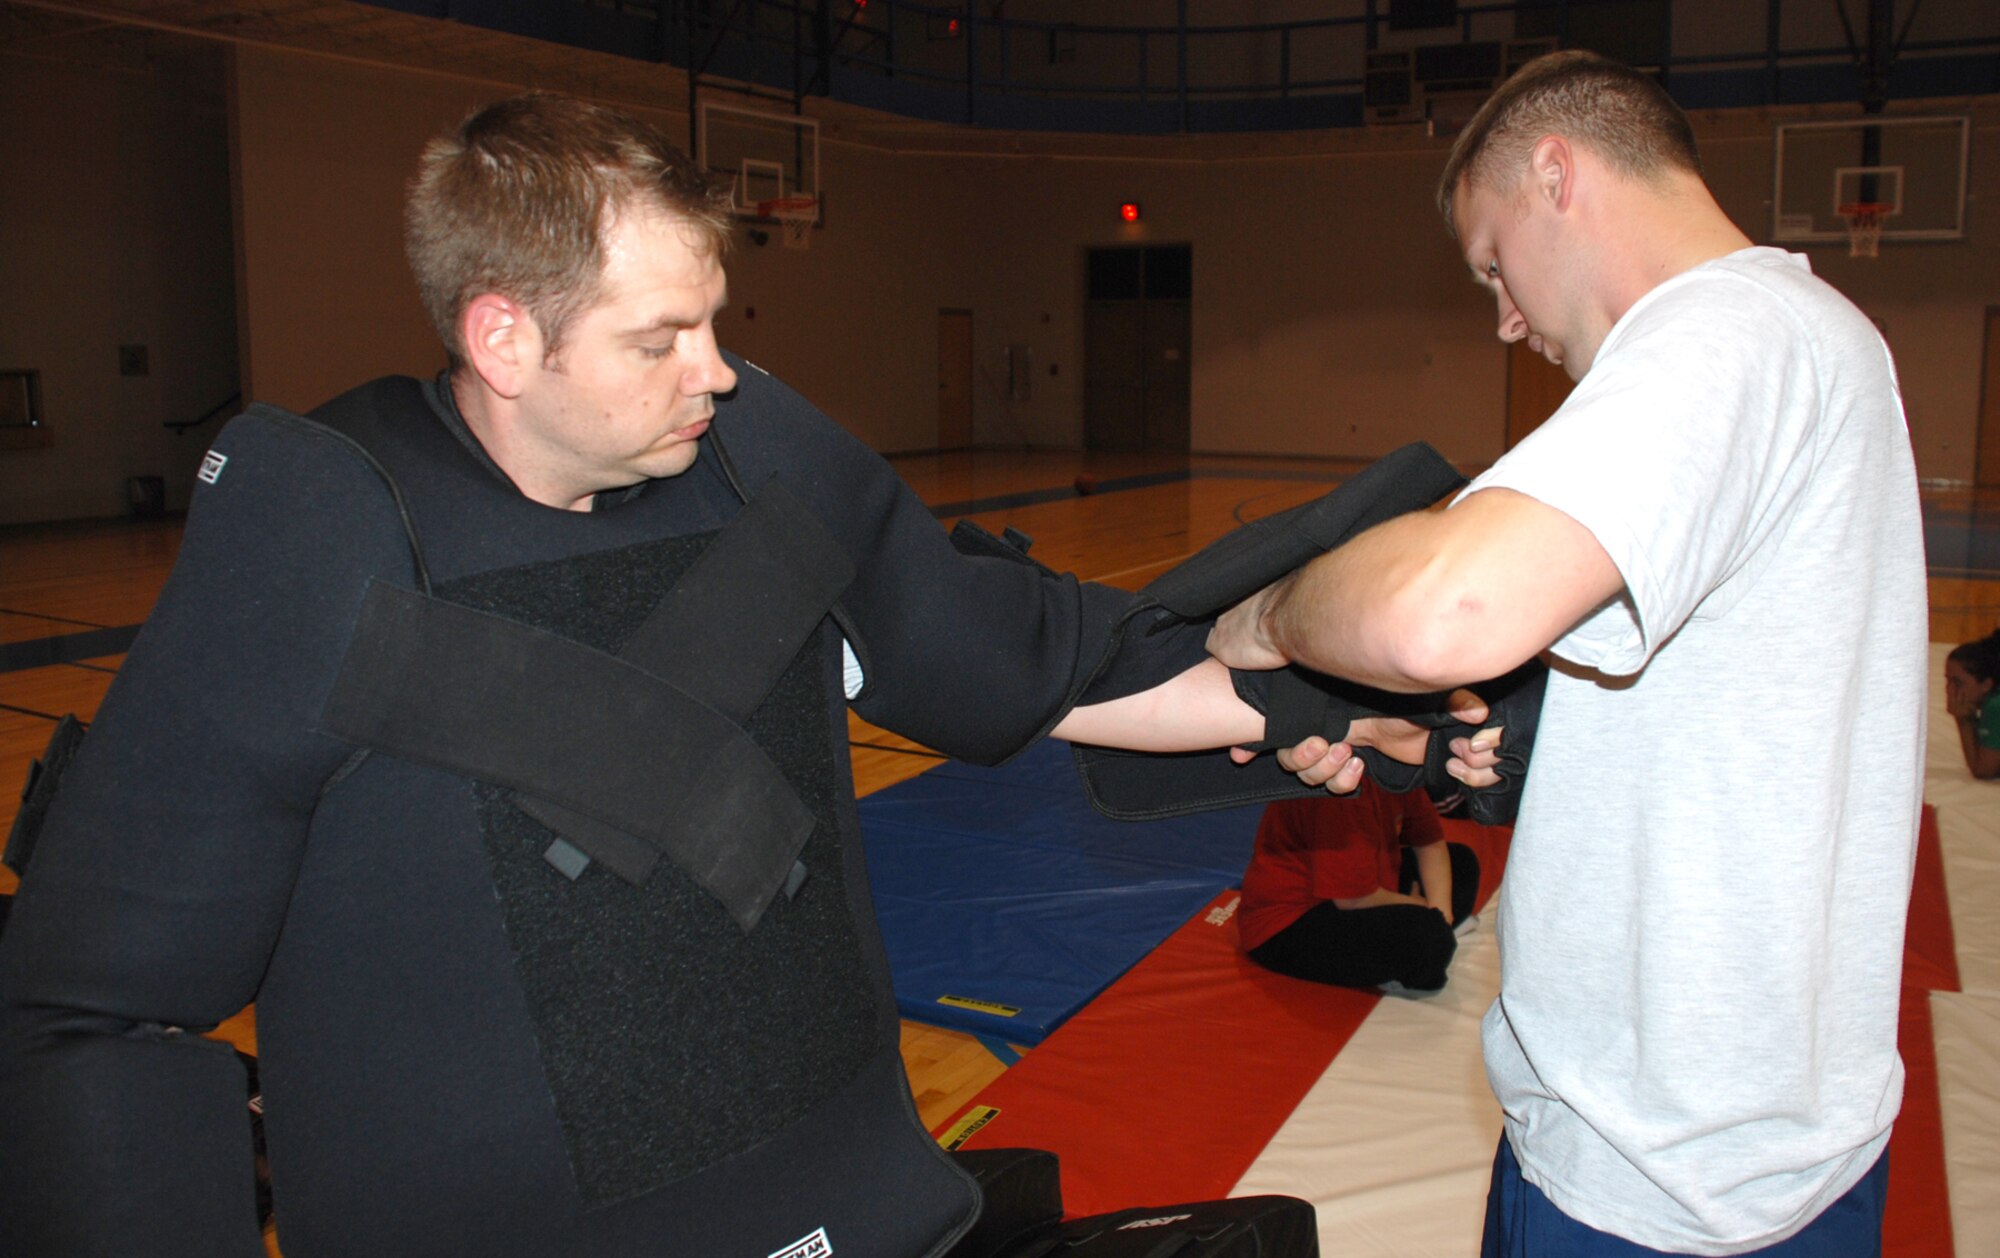 Senior Airman Scott Ury helps Staff Sgt. Sean Gray put on a padded suit, April 18, so he may play the role of an attacker during a women’s self-defense course at the fitness center here. Both Airman Ury and Sergeant Gray are members of the 22nd Security Forces Squadron and women’s self-defense course instructors. (Photo by Airman 1st Class Jessica Lockoski)